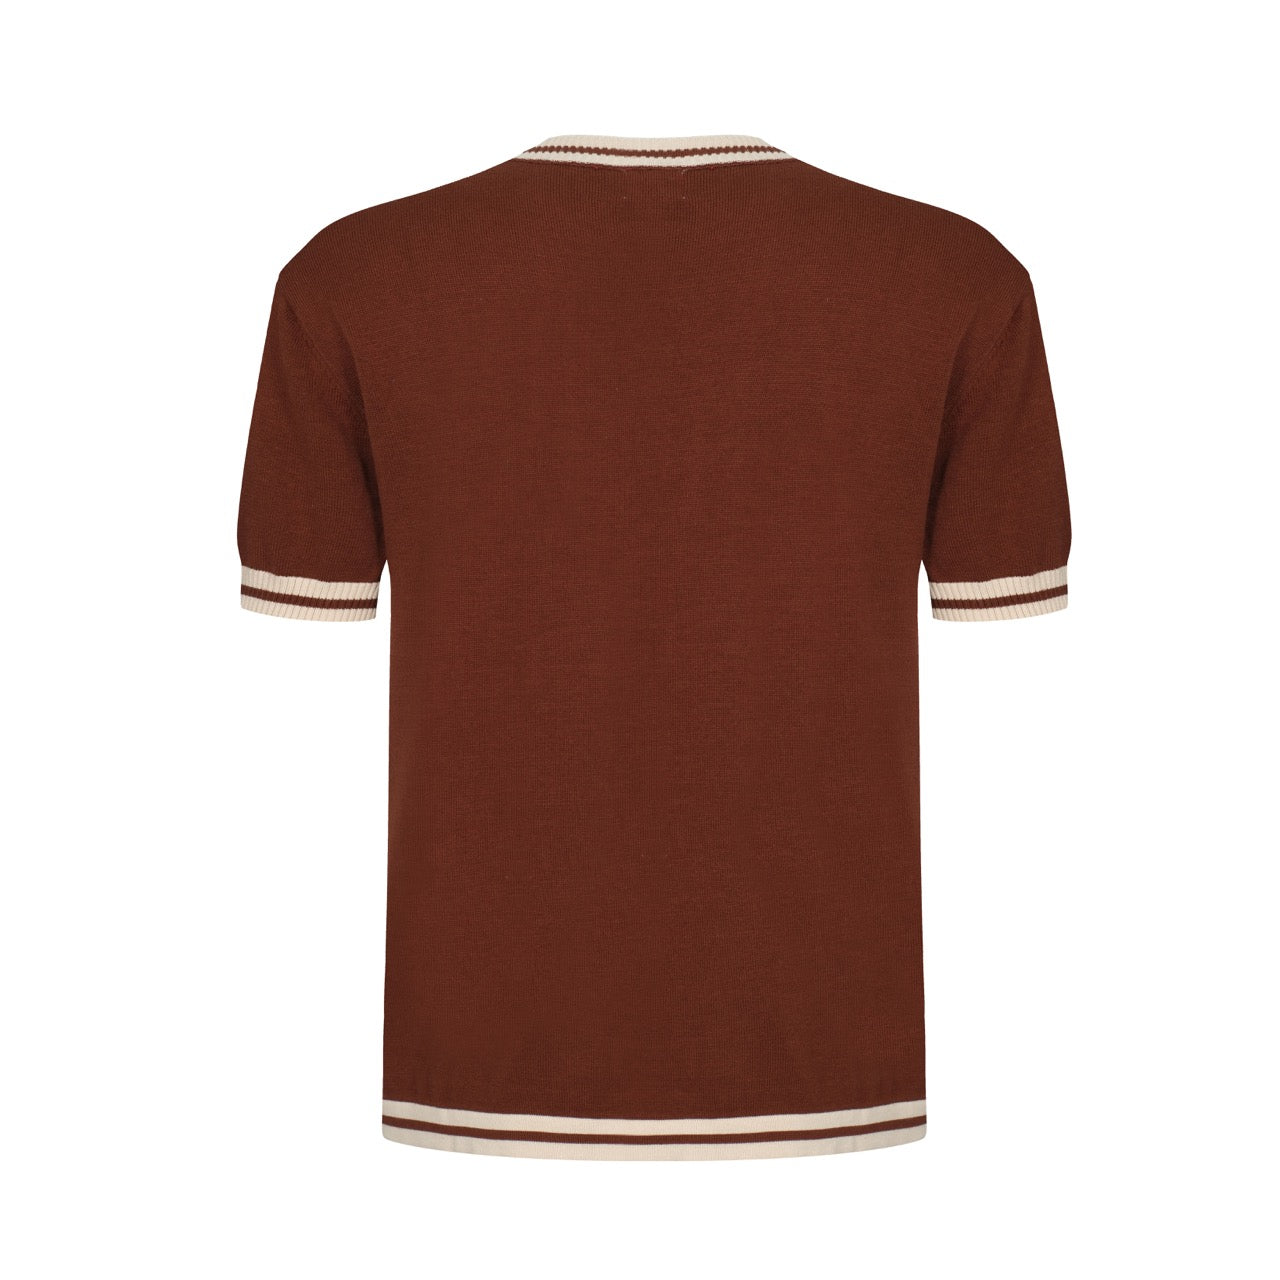 OXKNIT Men Vintage Clothing 1970s Mod Style Casual Brown Stripe Retro T-Shirt